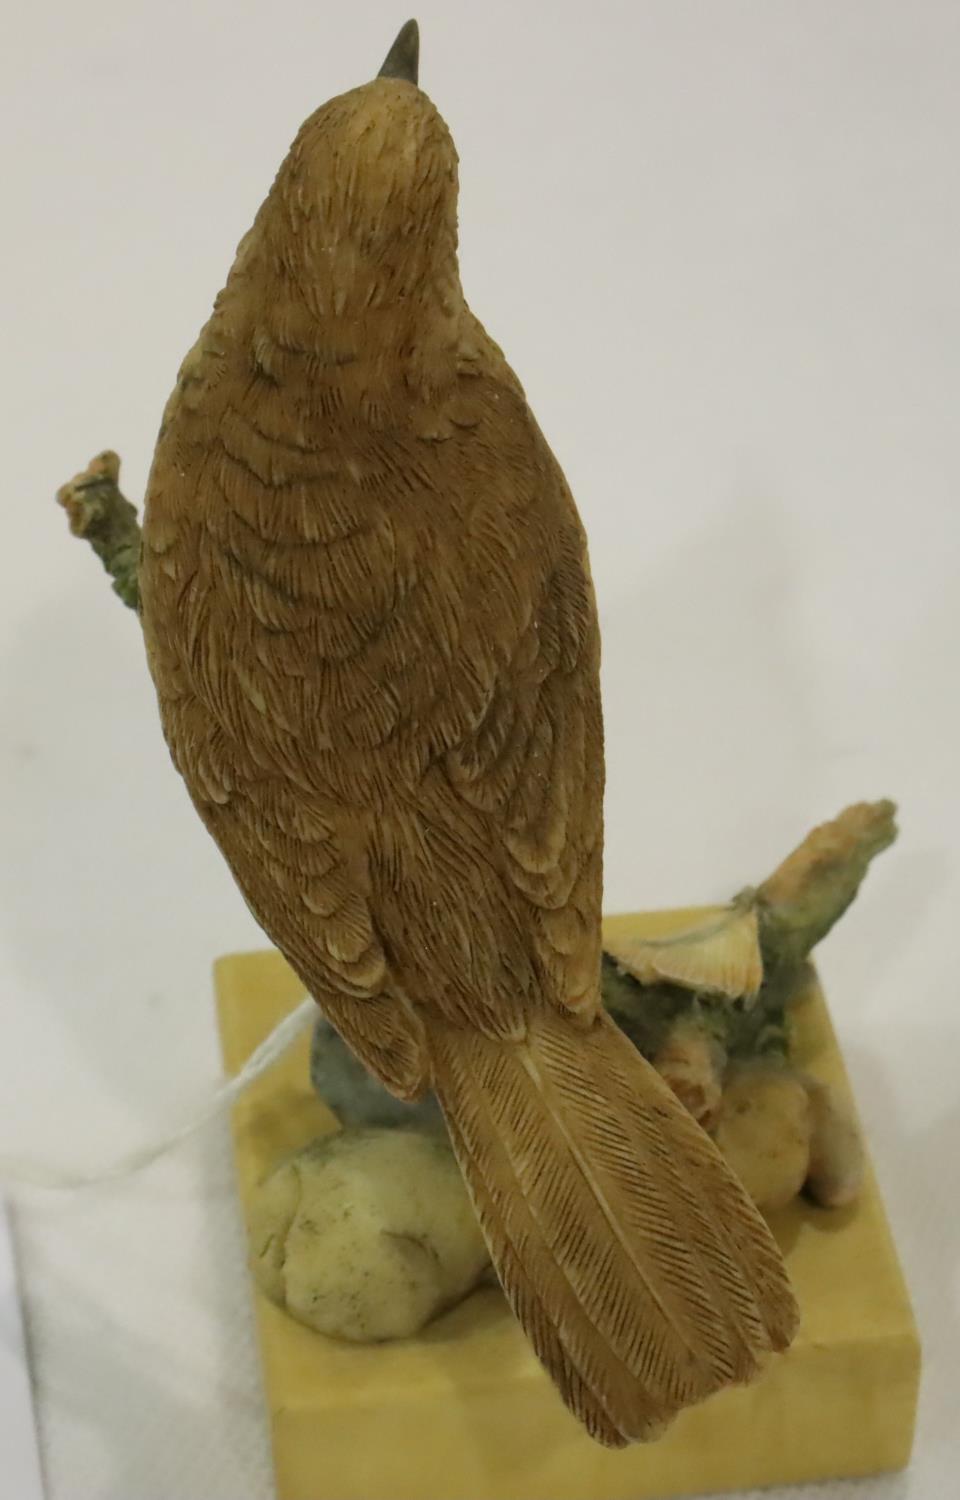 Ceramic Country Artists Broadway birds model of song thrush on branch, boxed, H: 11 cm, no cracks, - Image 3 of 4